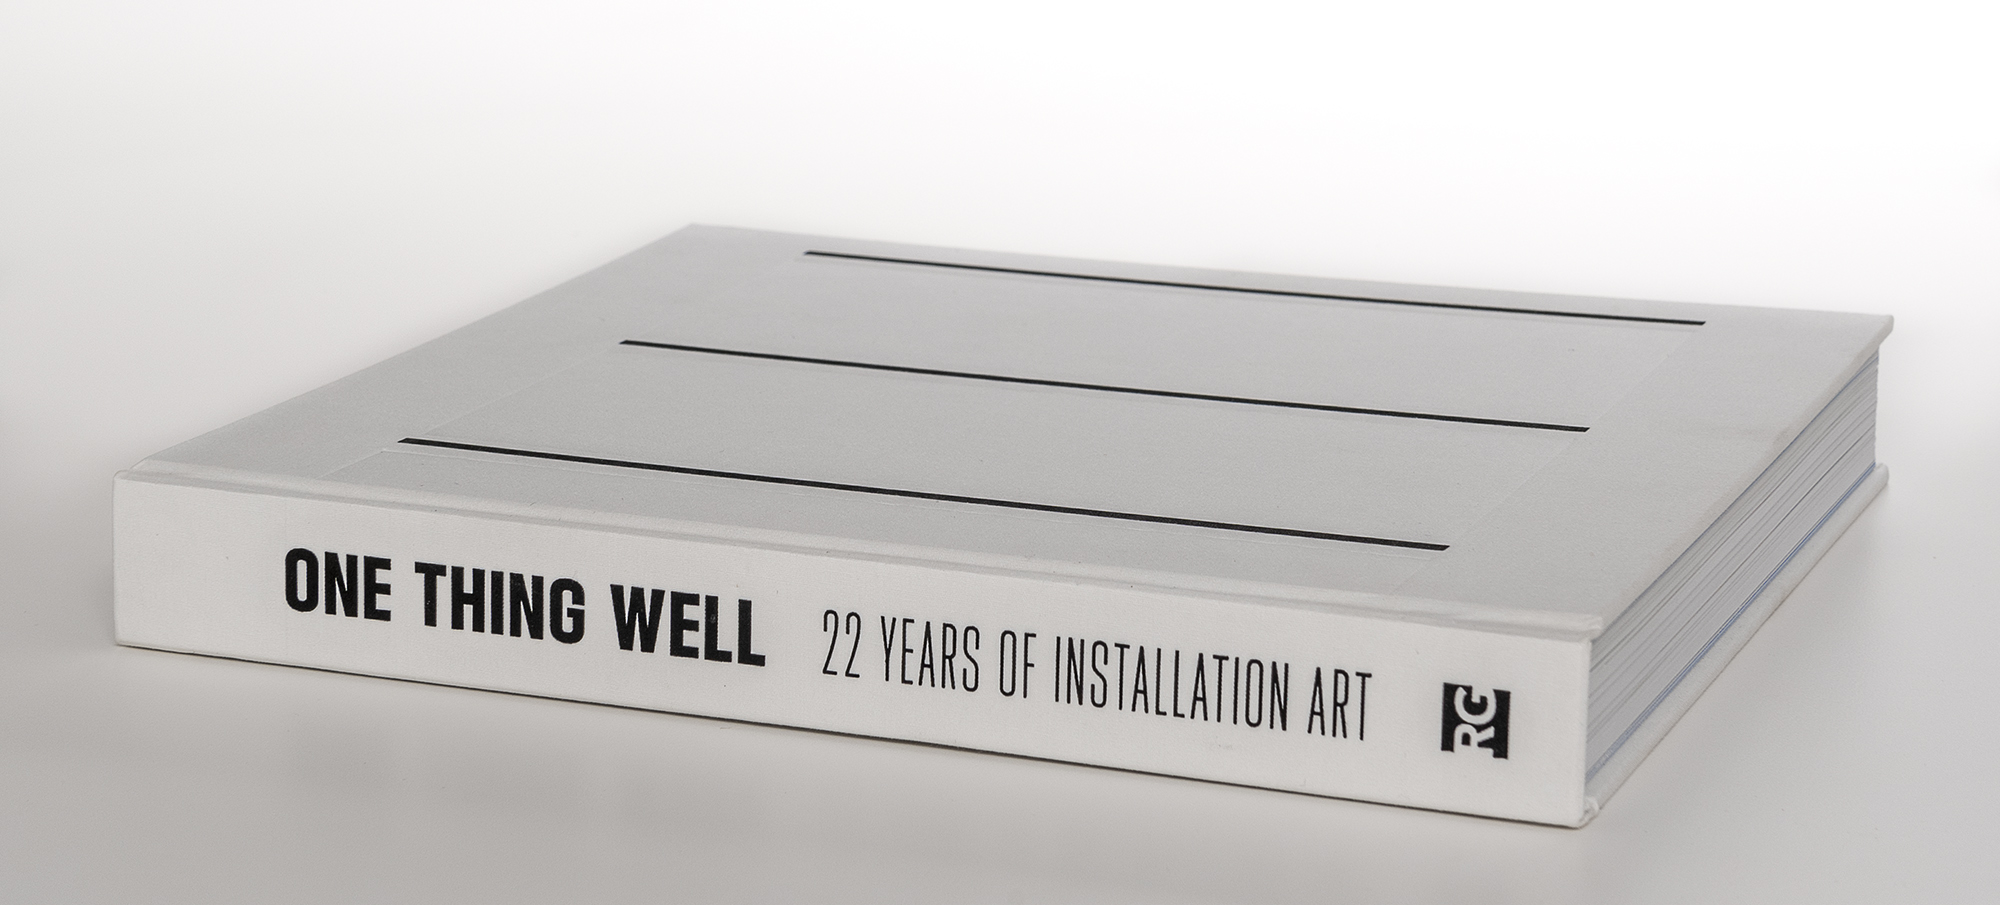 One Thing Well: 22 Years of Installation Art